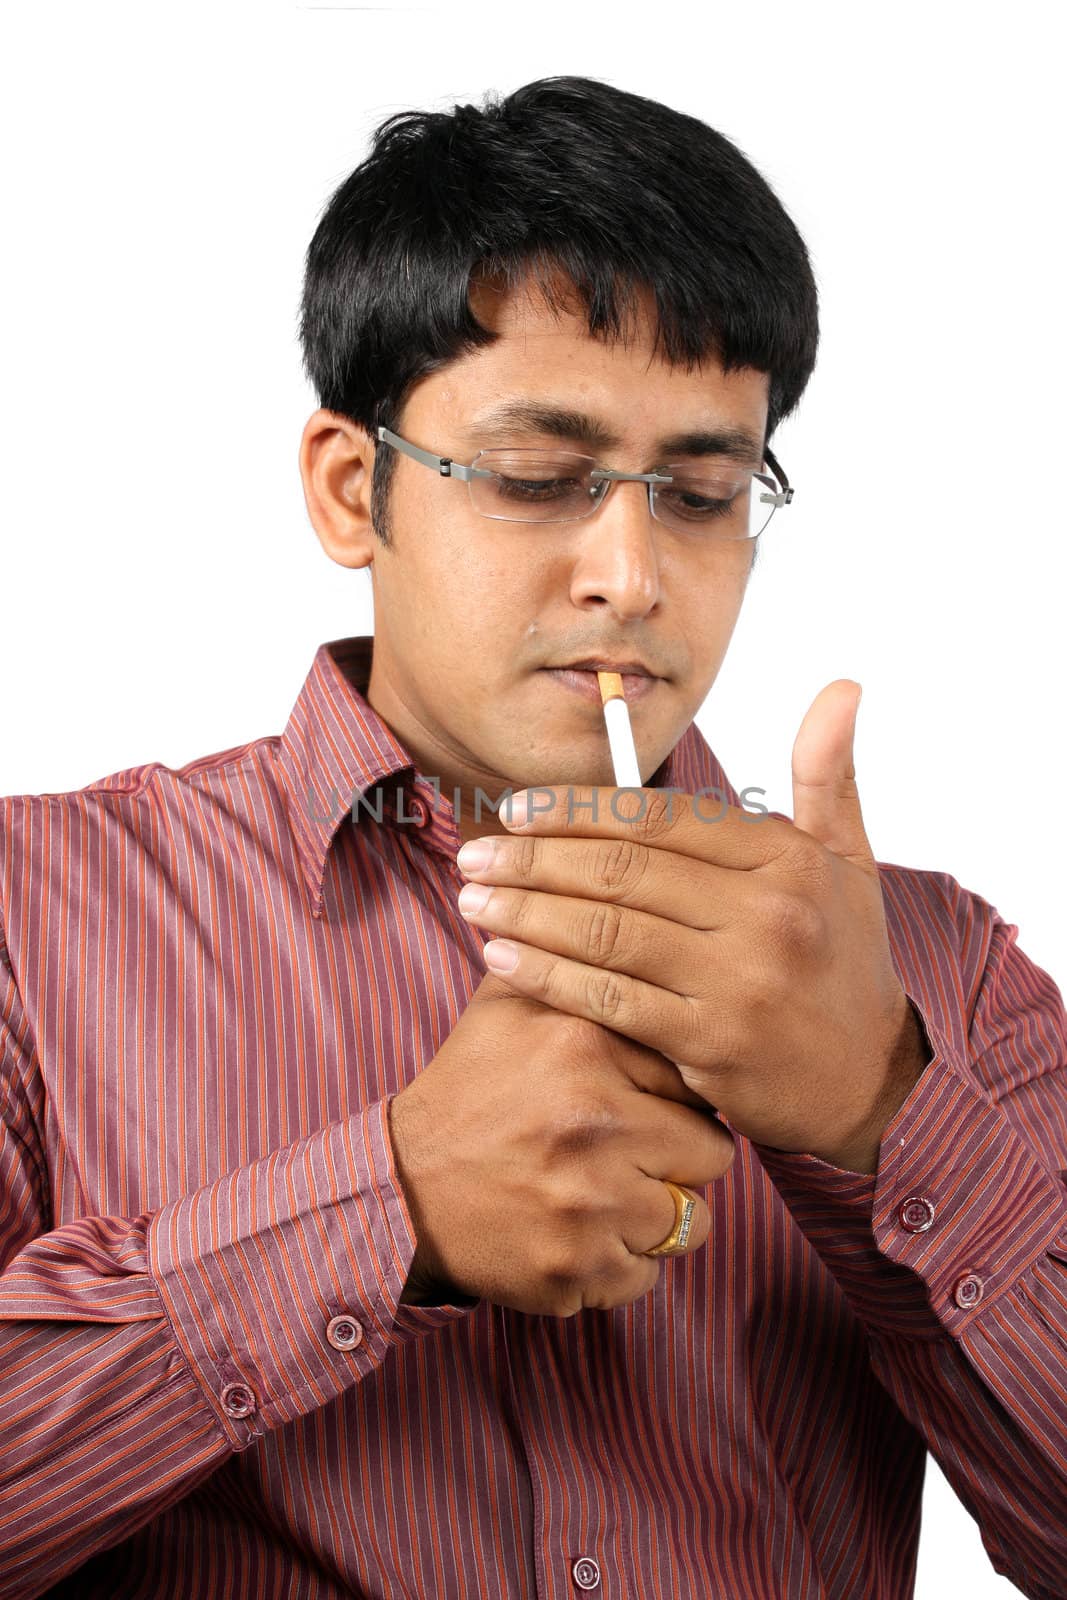 An Indian office executive lighting his cigarette during a break, on white studio background.